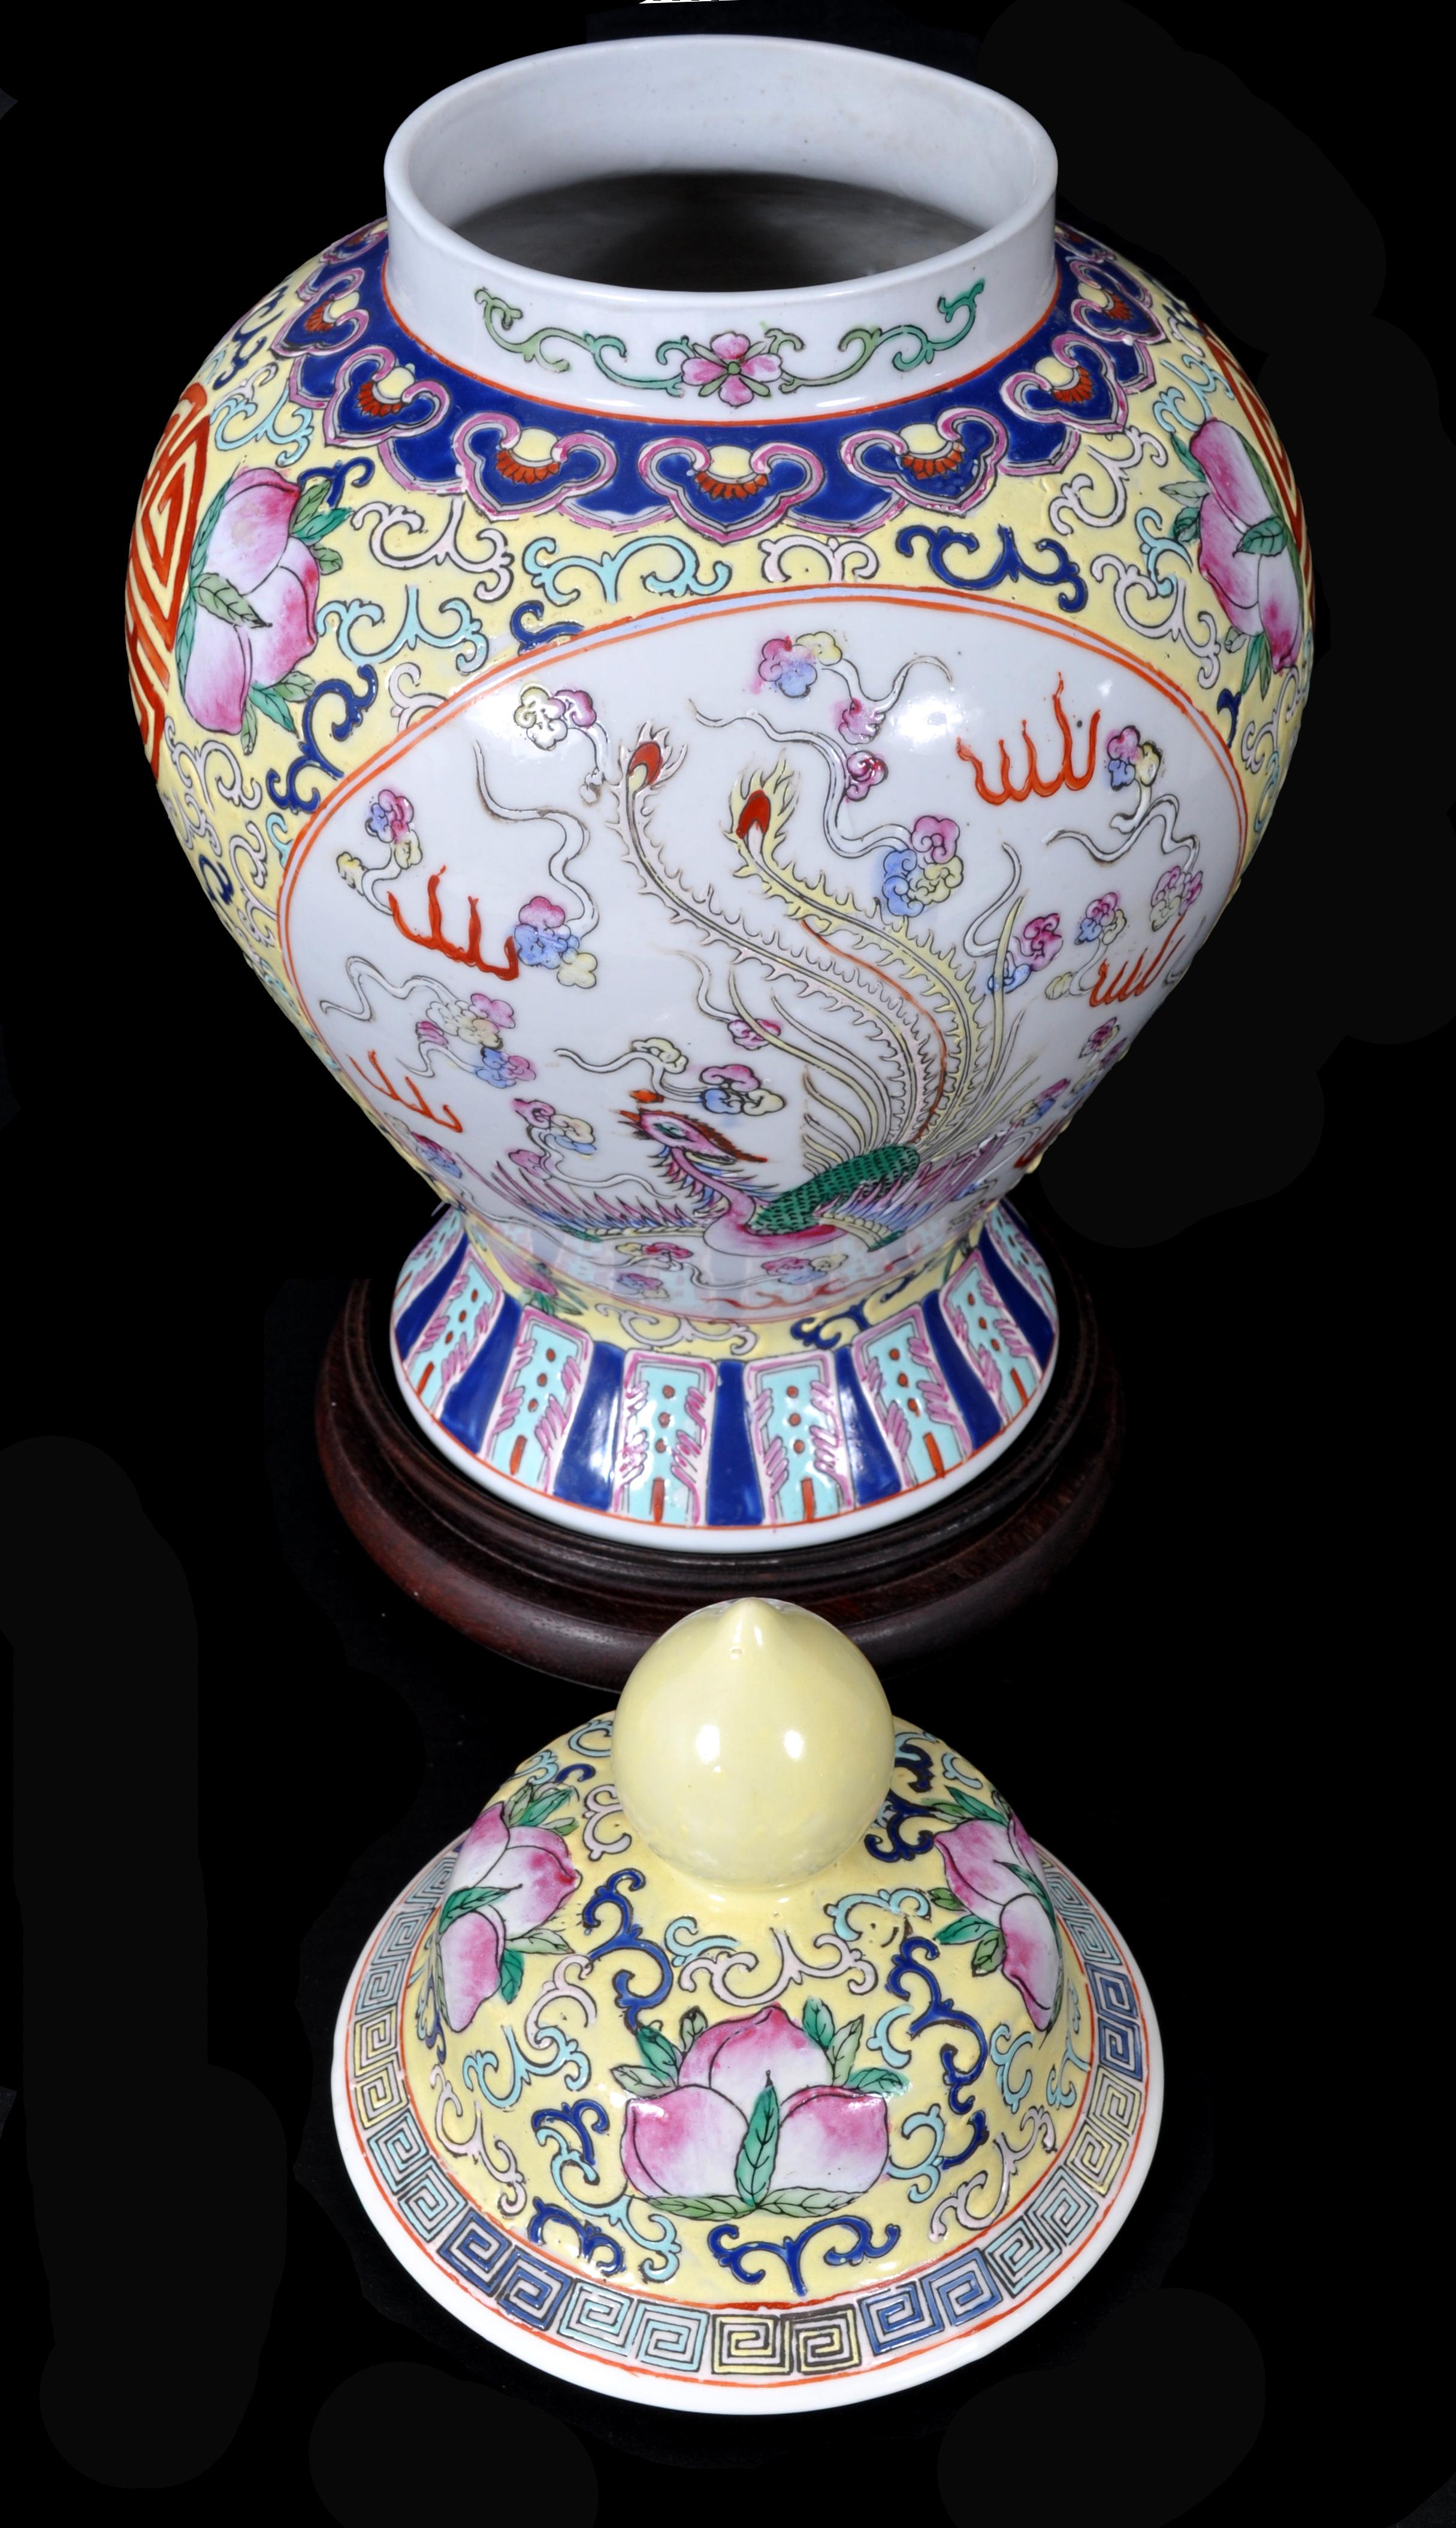 19th Century Chinese Qing Dynasty Imperial Porcelain Lidded Ginger Jar, 1880 In Good Condition For Sale In Portland, OR